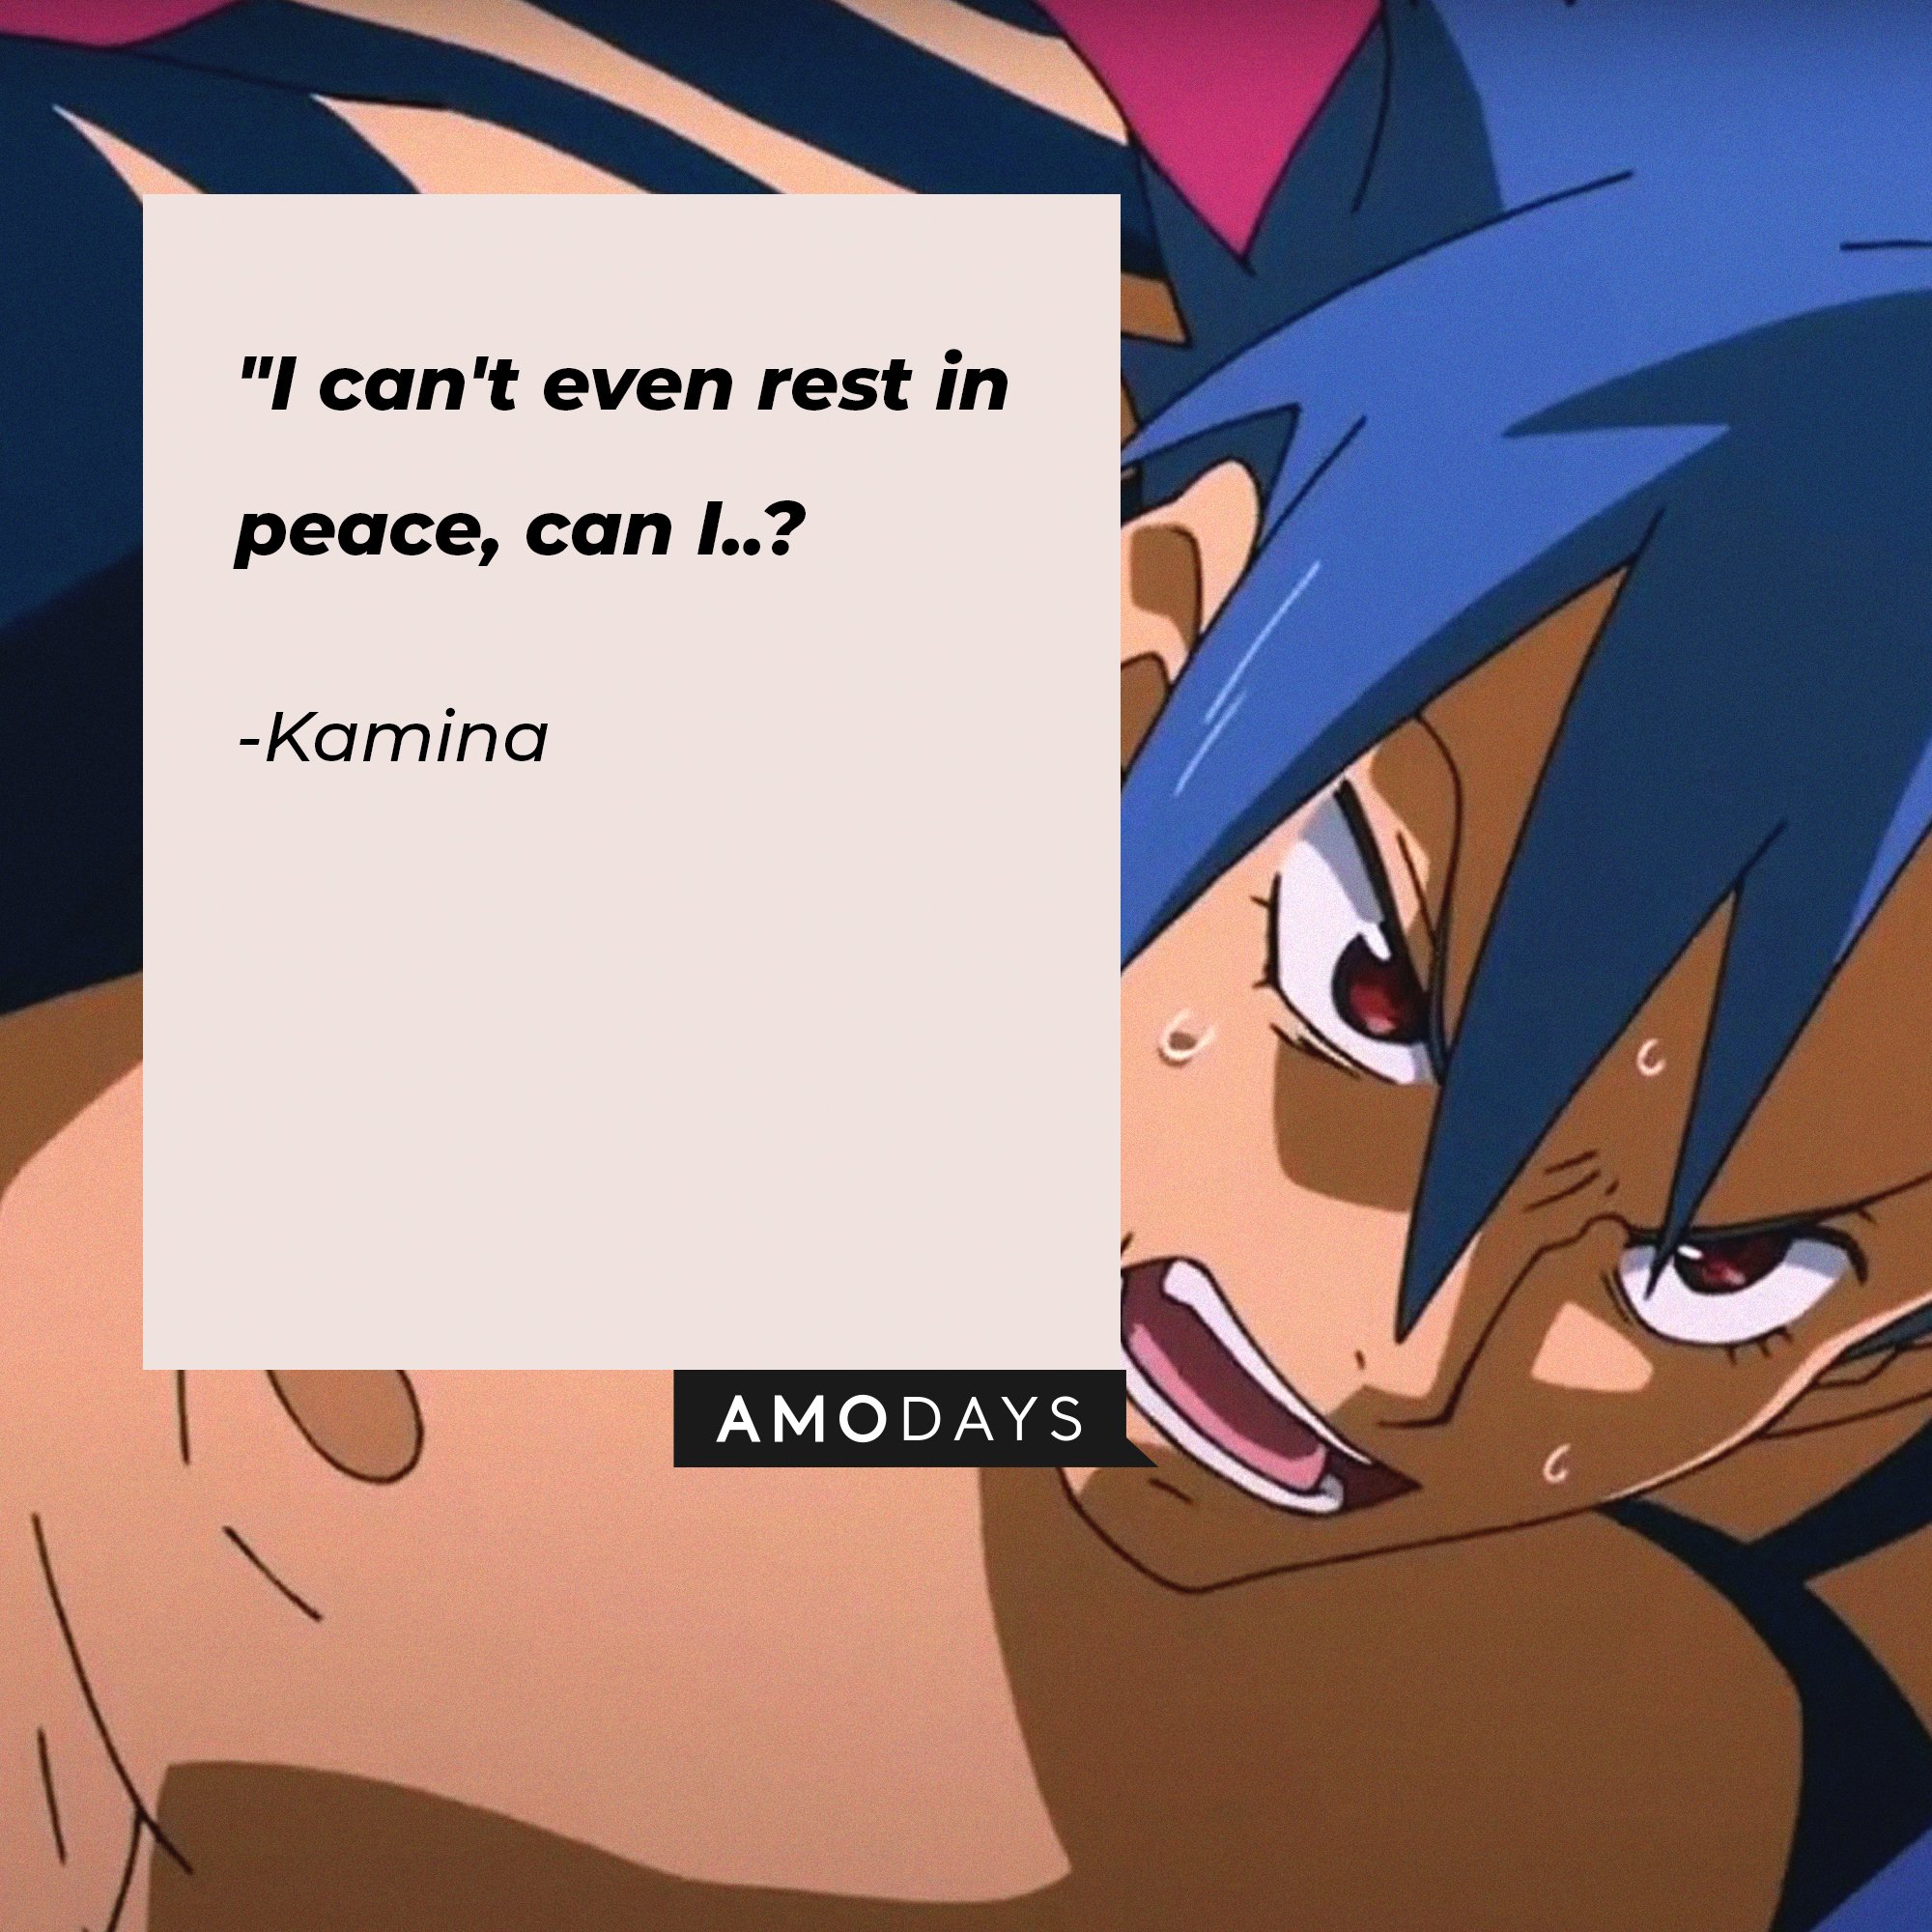 Kamina's quote: "I can't even rest in peace, can I..?" | Image: AmoDays  